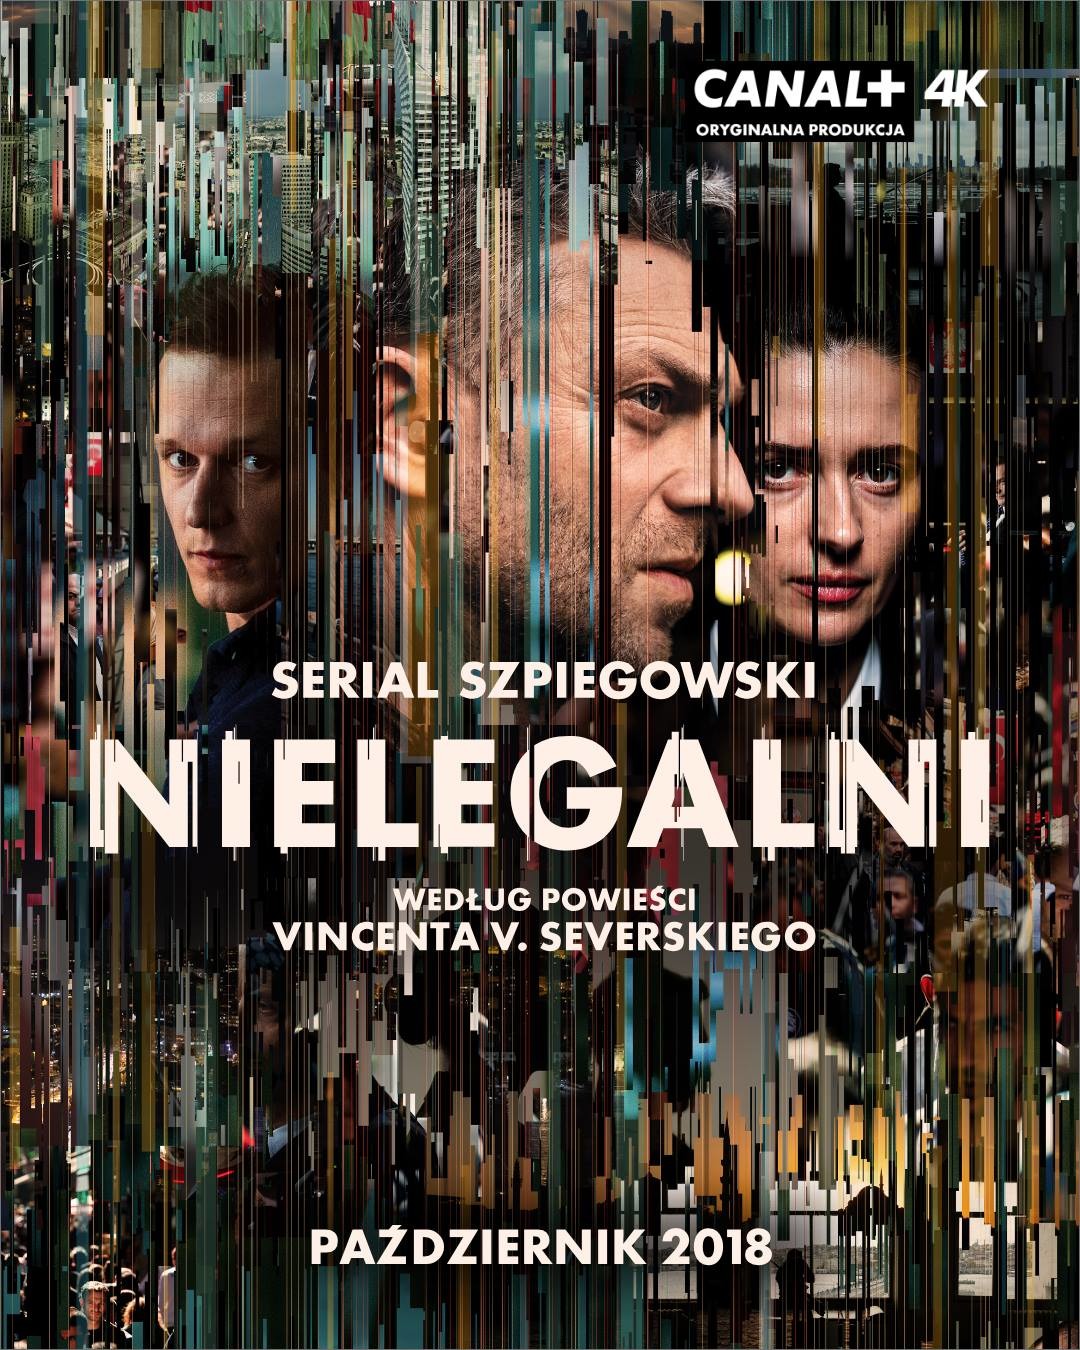 Extra Large TV Poster Image for Nielegalni 